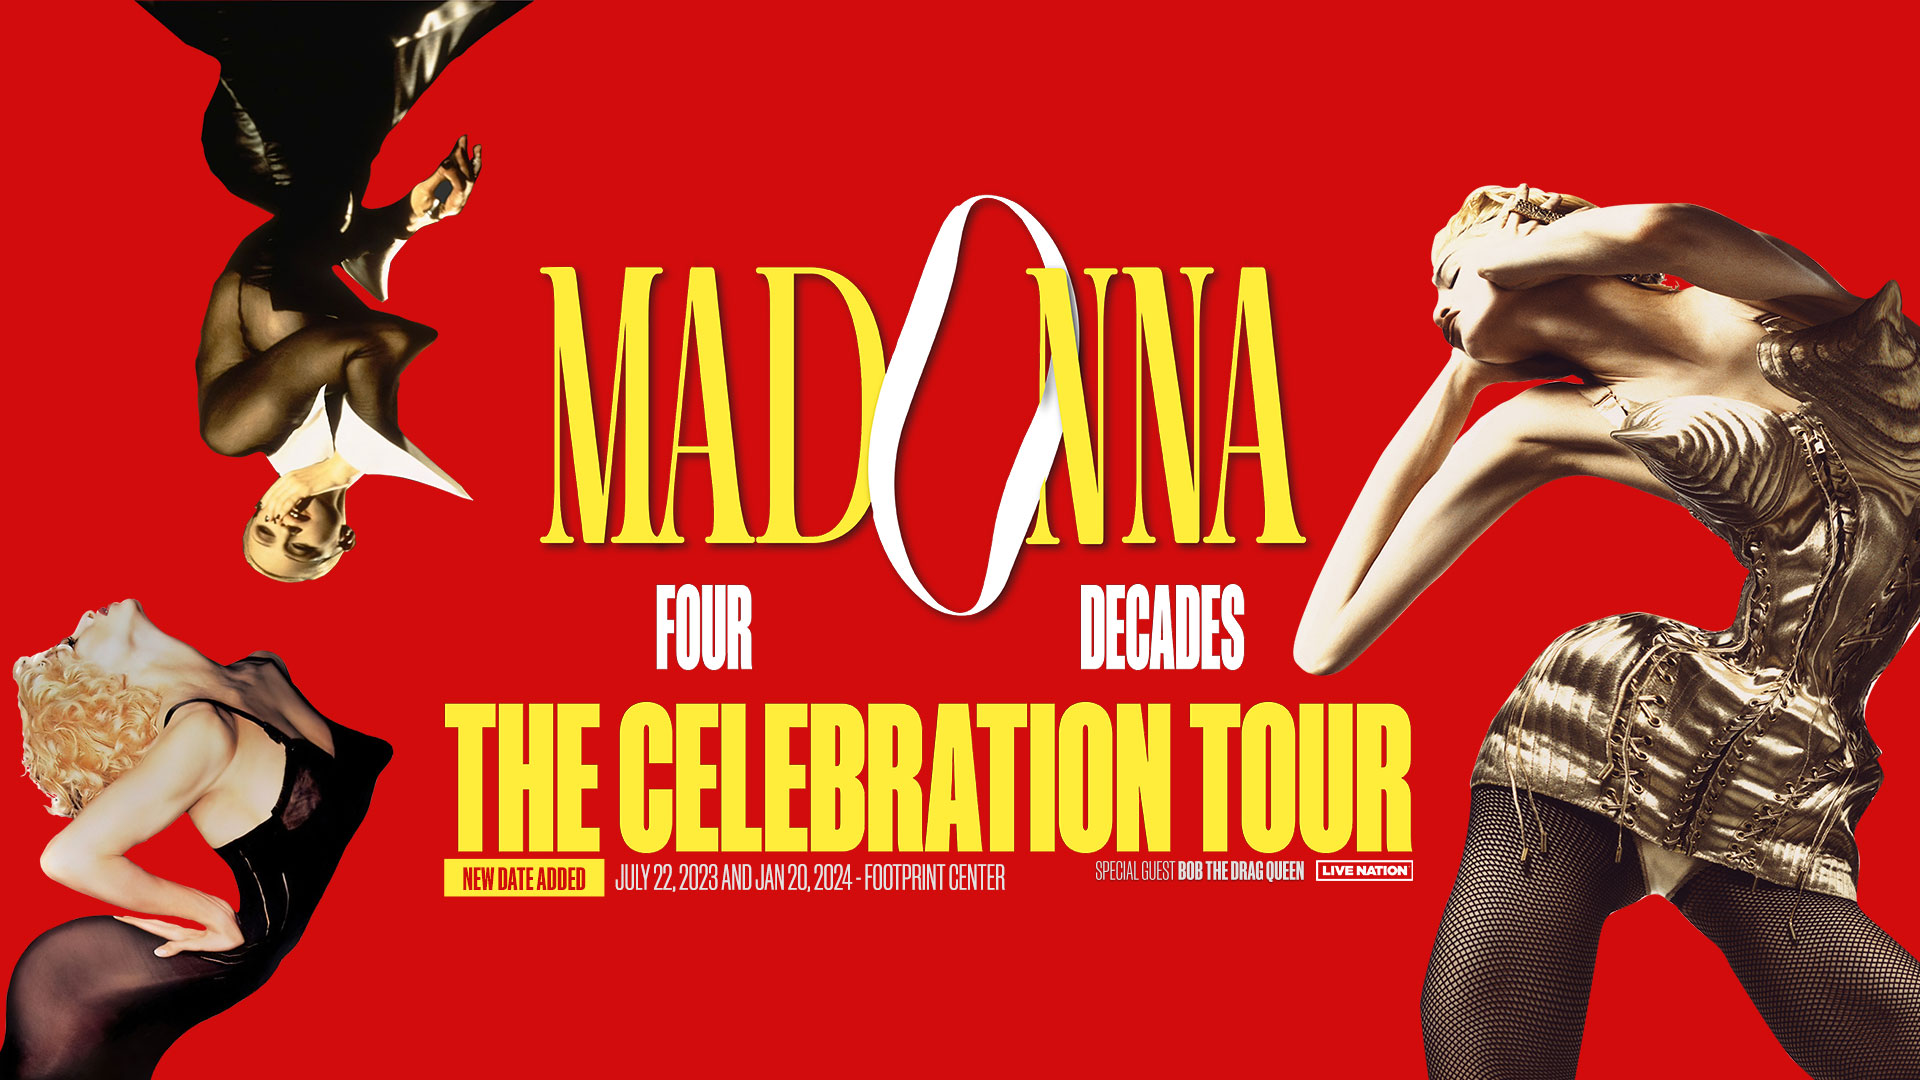 Madonna - Four Decades - The Celebration Tour on July 22, 2023 and Jan 20, 2024